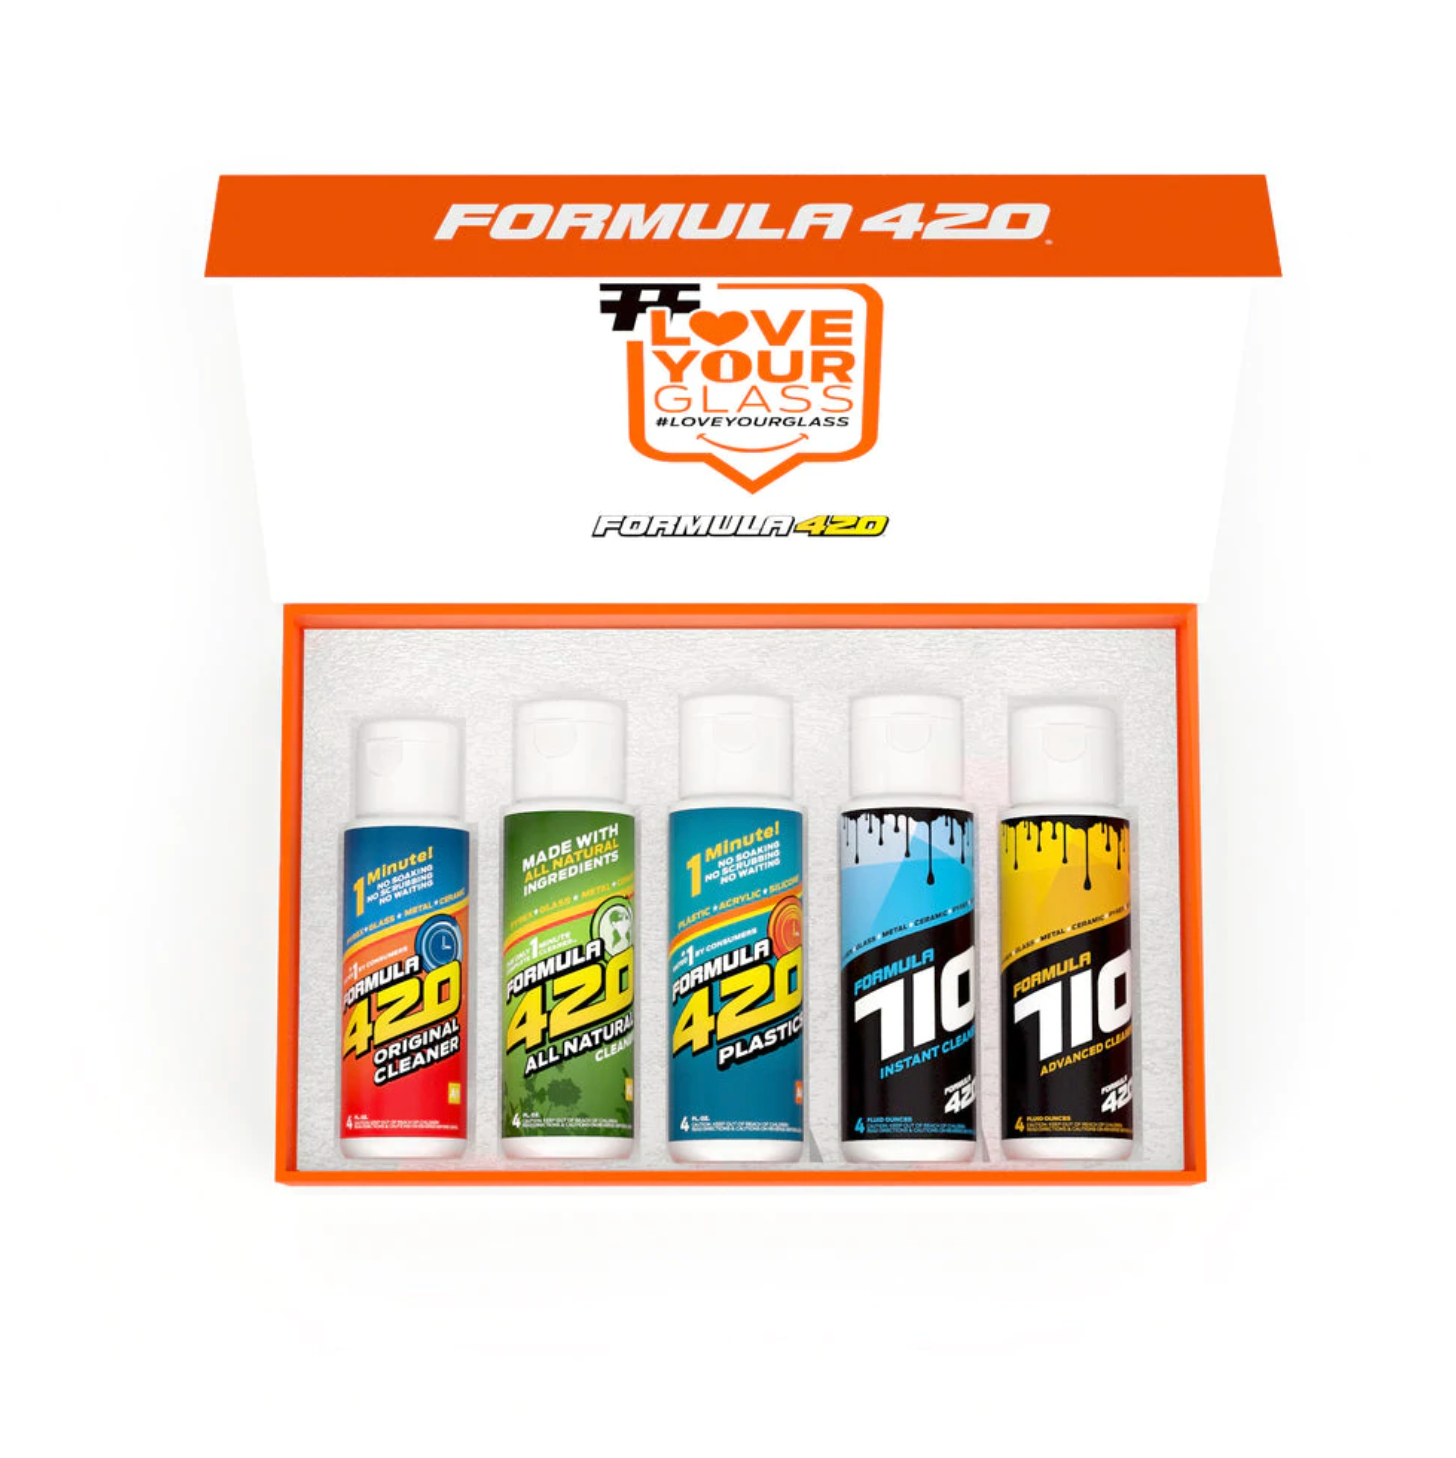 Formula 710 Advanced Cleaner Review 